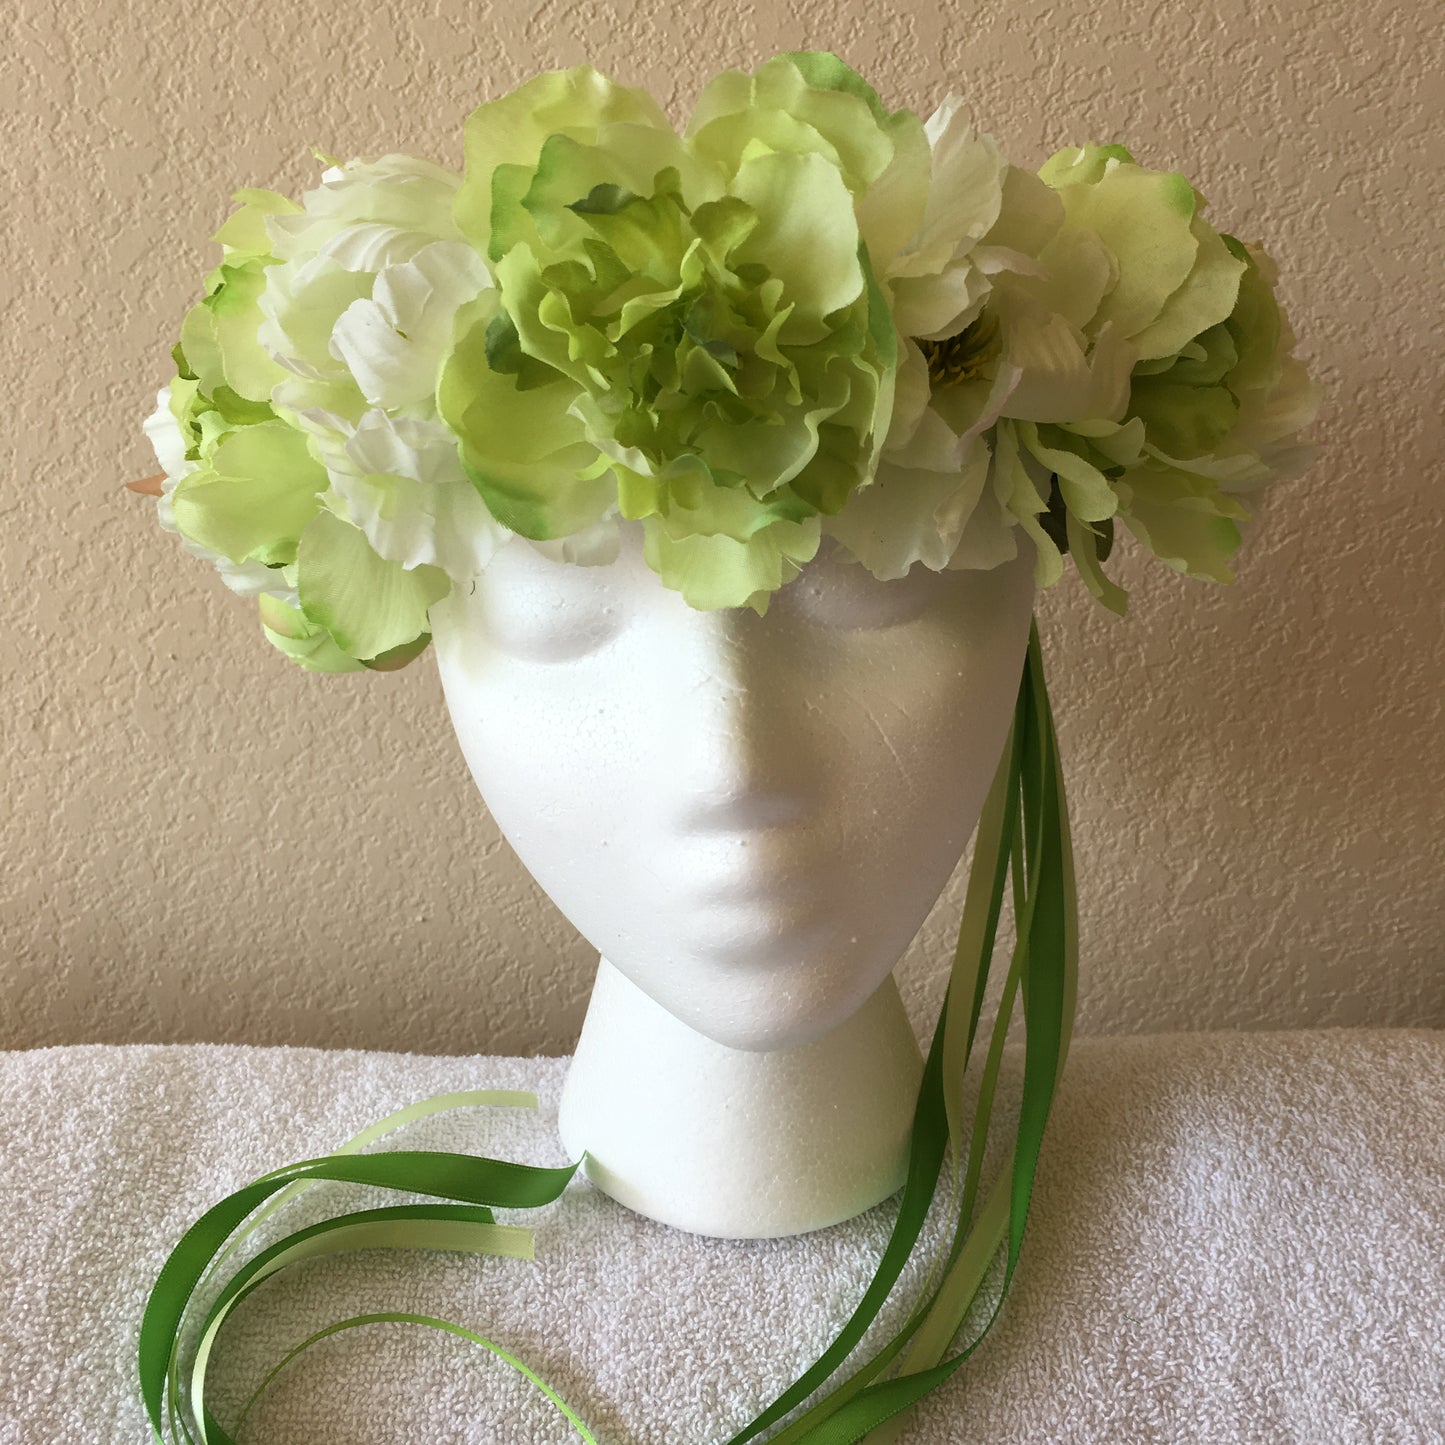 Medium Wreath - Shades of green & pale green flowers w/ bud accents